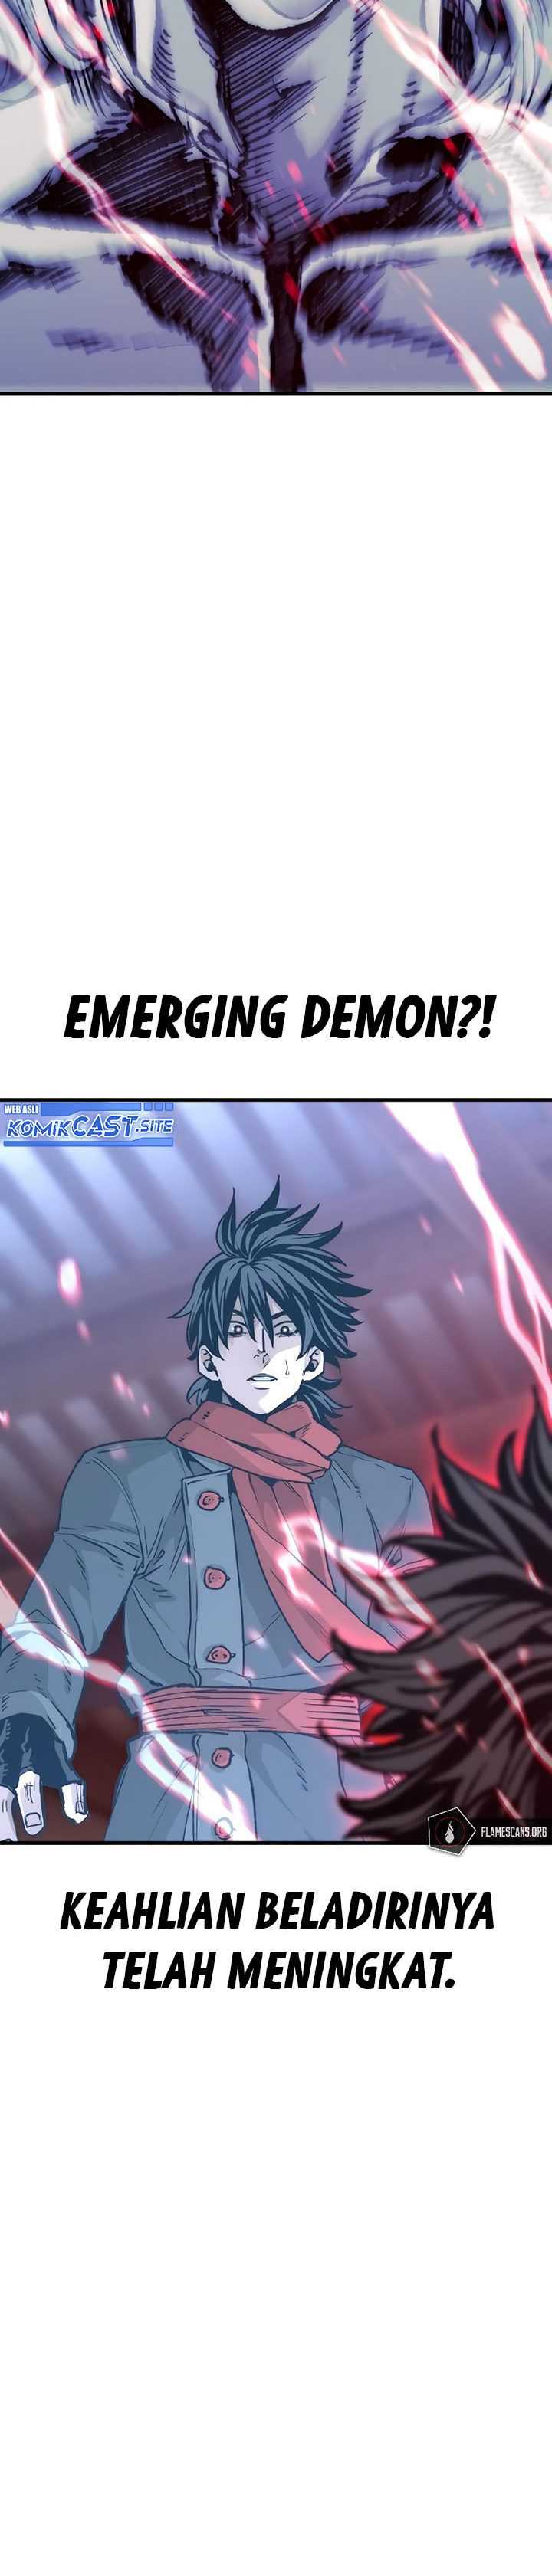 Heavenly Demon Cultivation Simulation Chapter 80 - 613